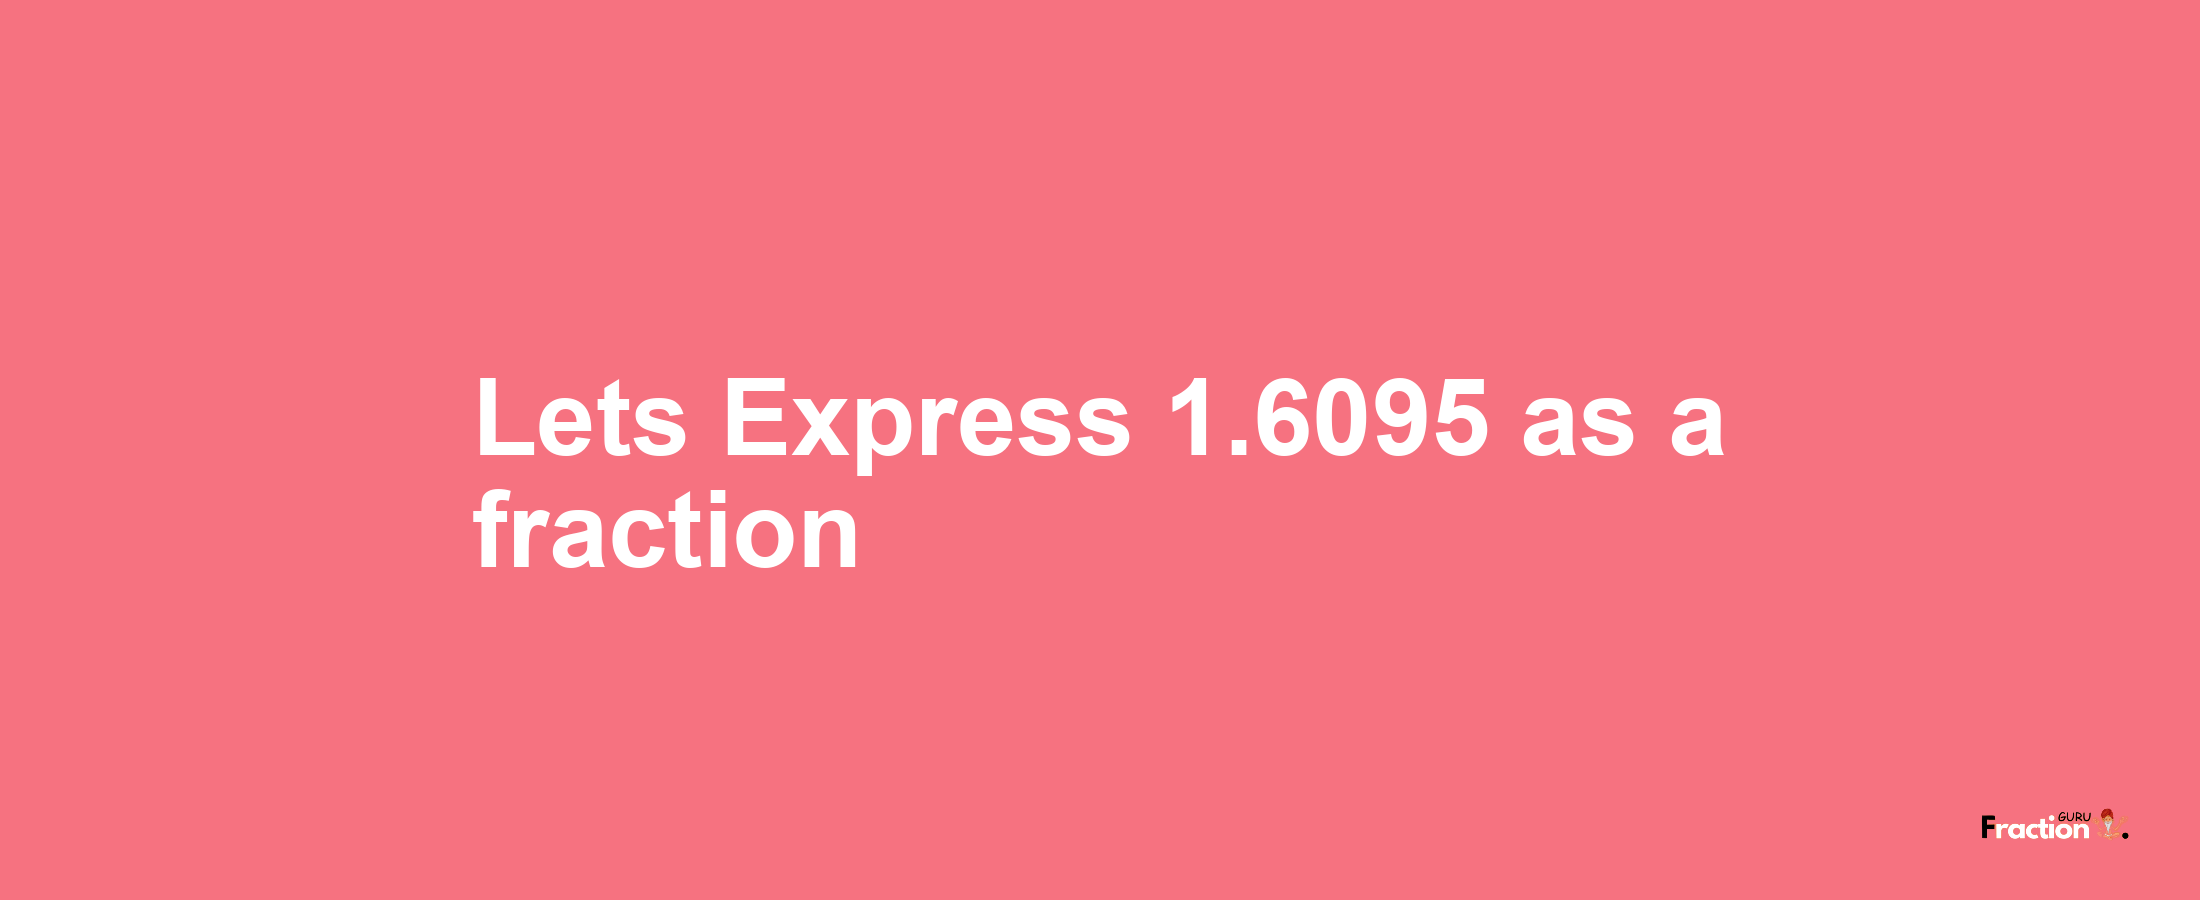 Lets Express 1.6095 as afraction